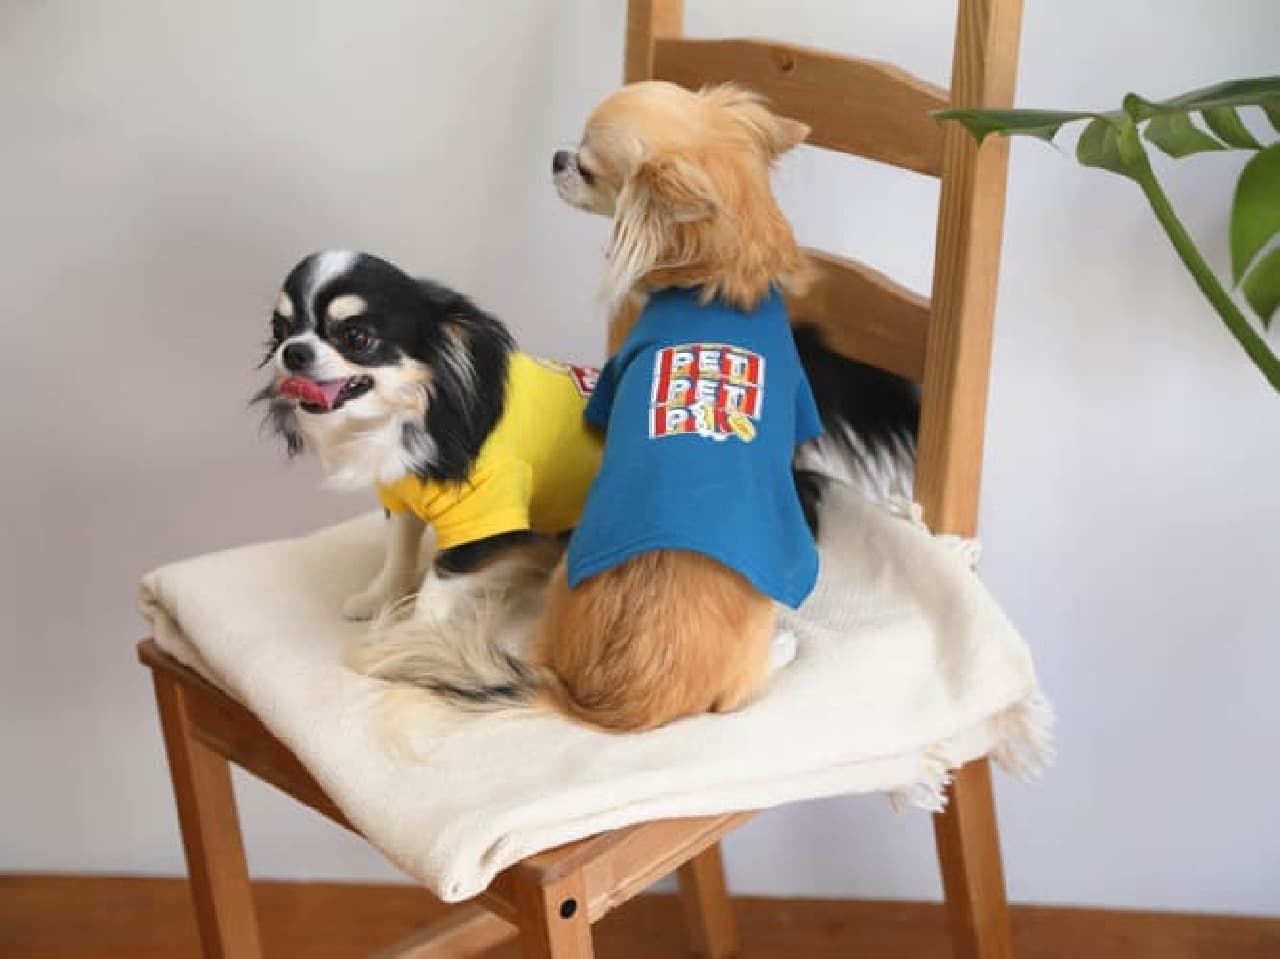 AWESOME STORE New Pet Goods --Spring T-shirts are now available! Walking bags and ball toys